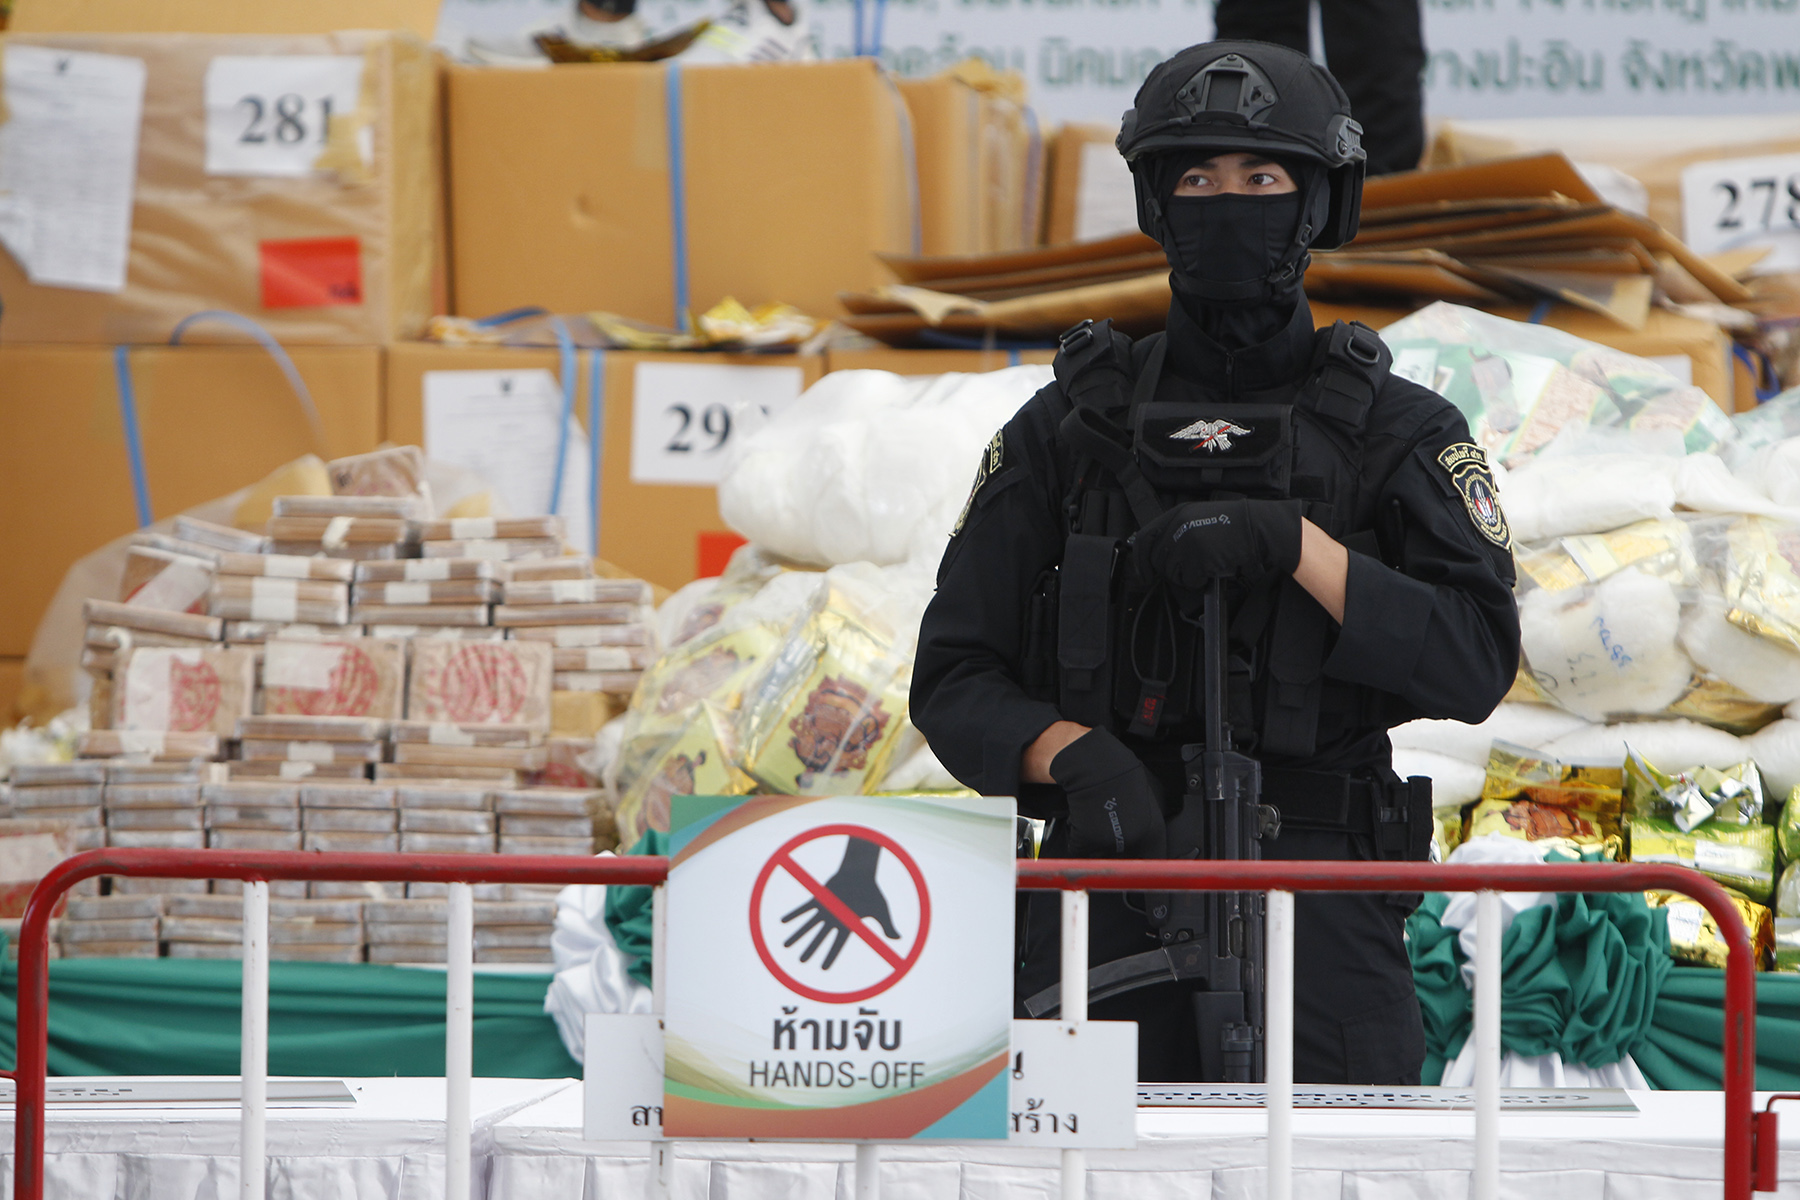 A Thai police officer guards bags of confiscated narcotics drug during the 50th Destruction of Confiscated Narcotics ceremony to mark the International Day Against Drug Abuse and Illicit Trafficking.